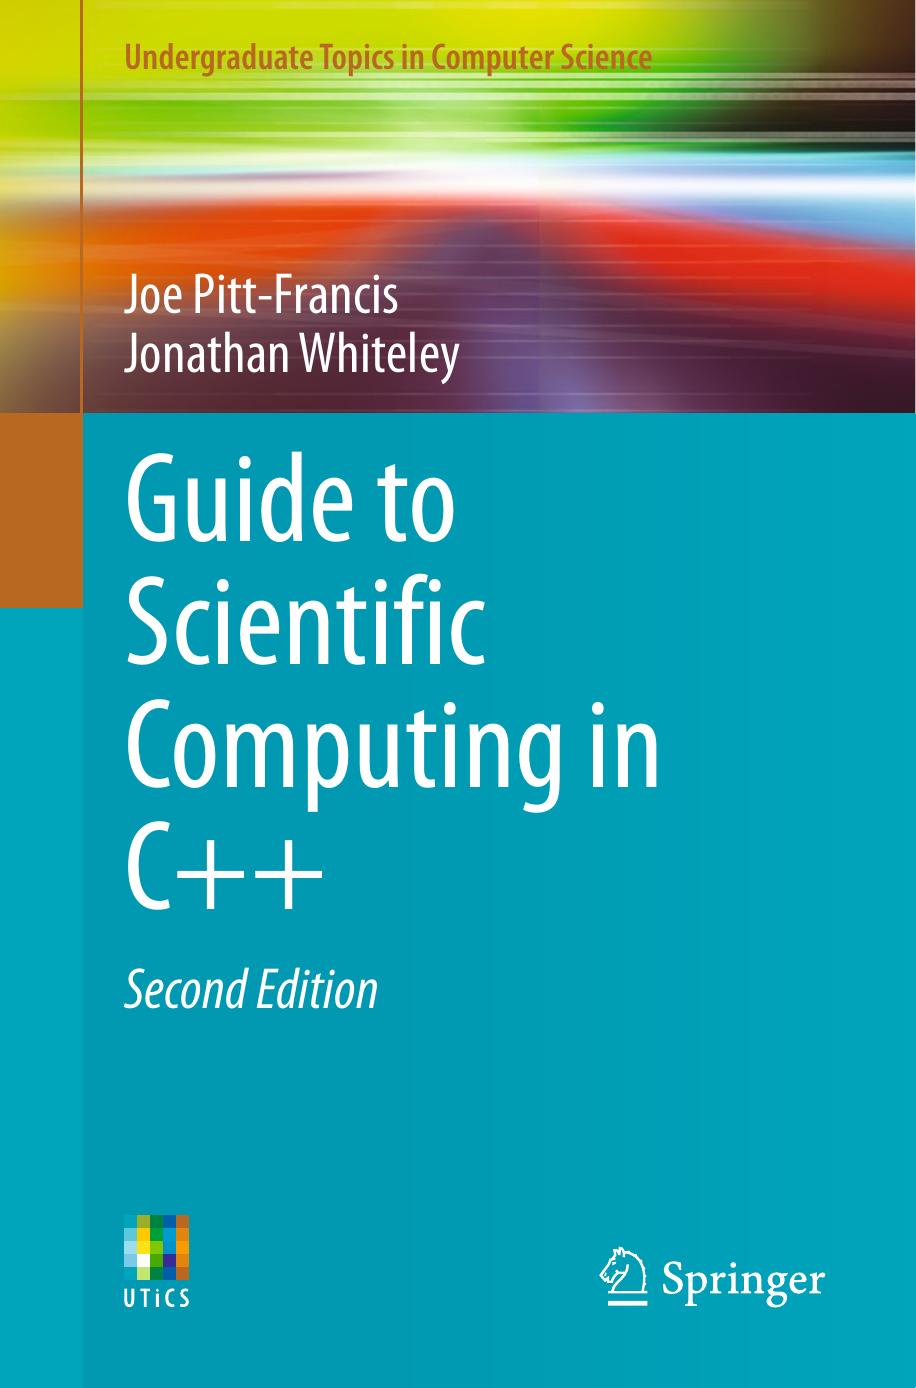 Guide to Scientific Computing in C++ by Joe Pitt-Francis & Jonathan Whiteley